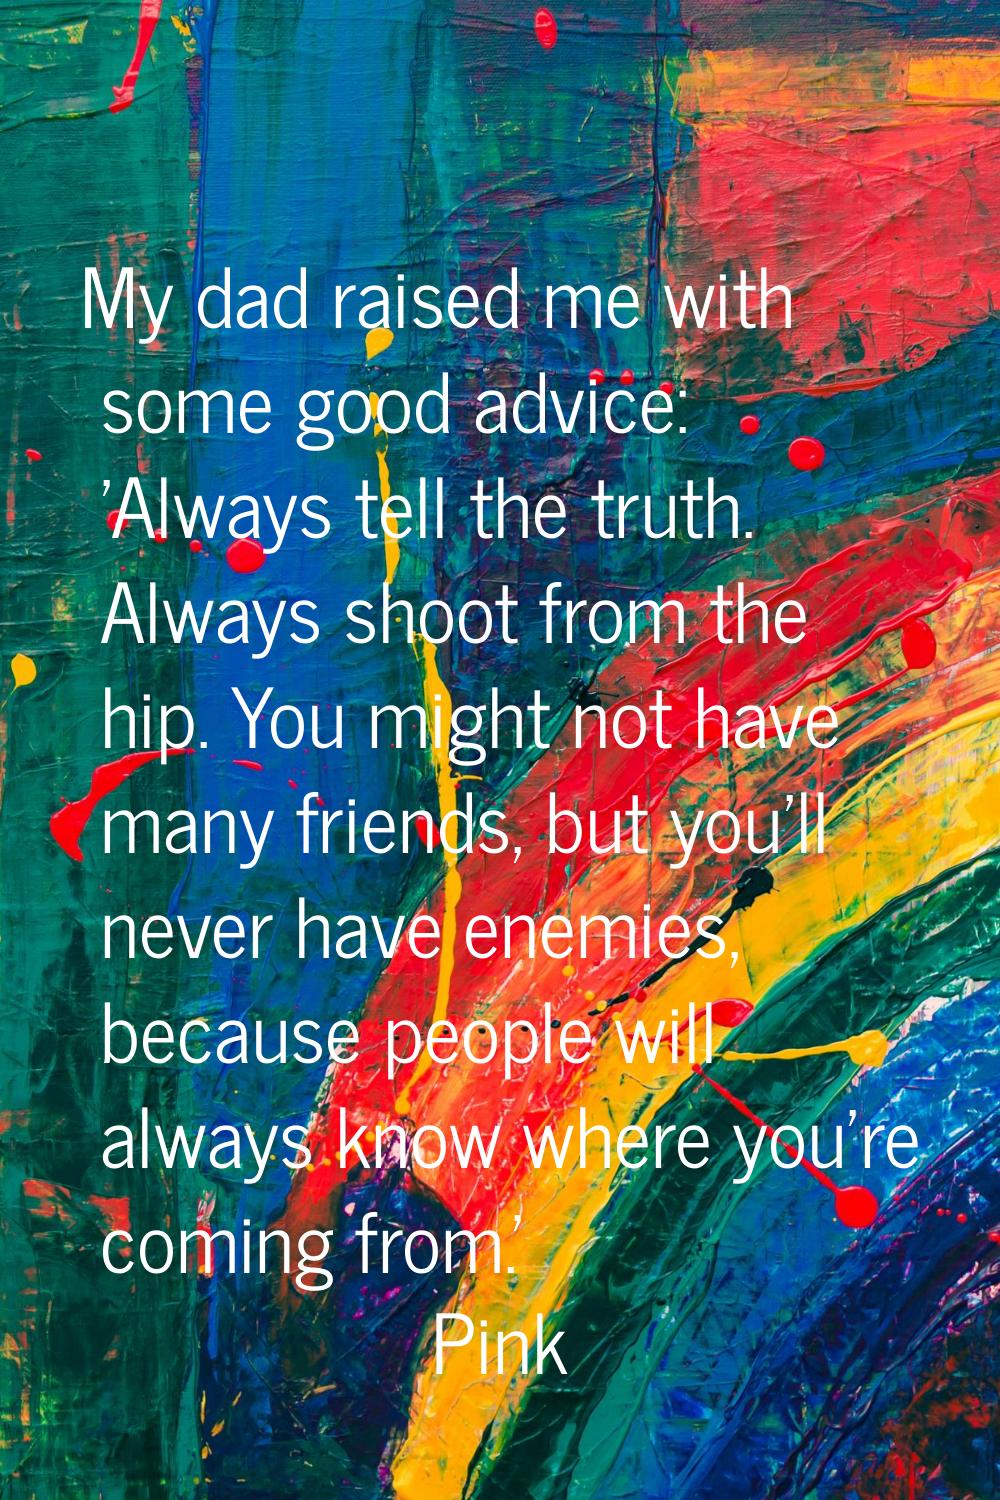 My dad raised me with some good advice: 'Always tell the truth. Always shoot from the hip. You migh